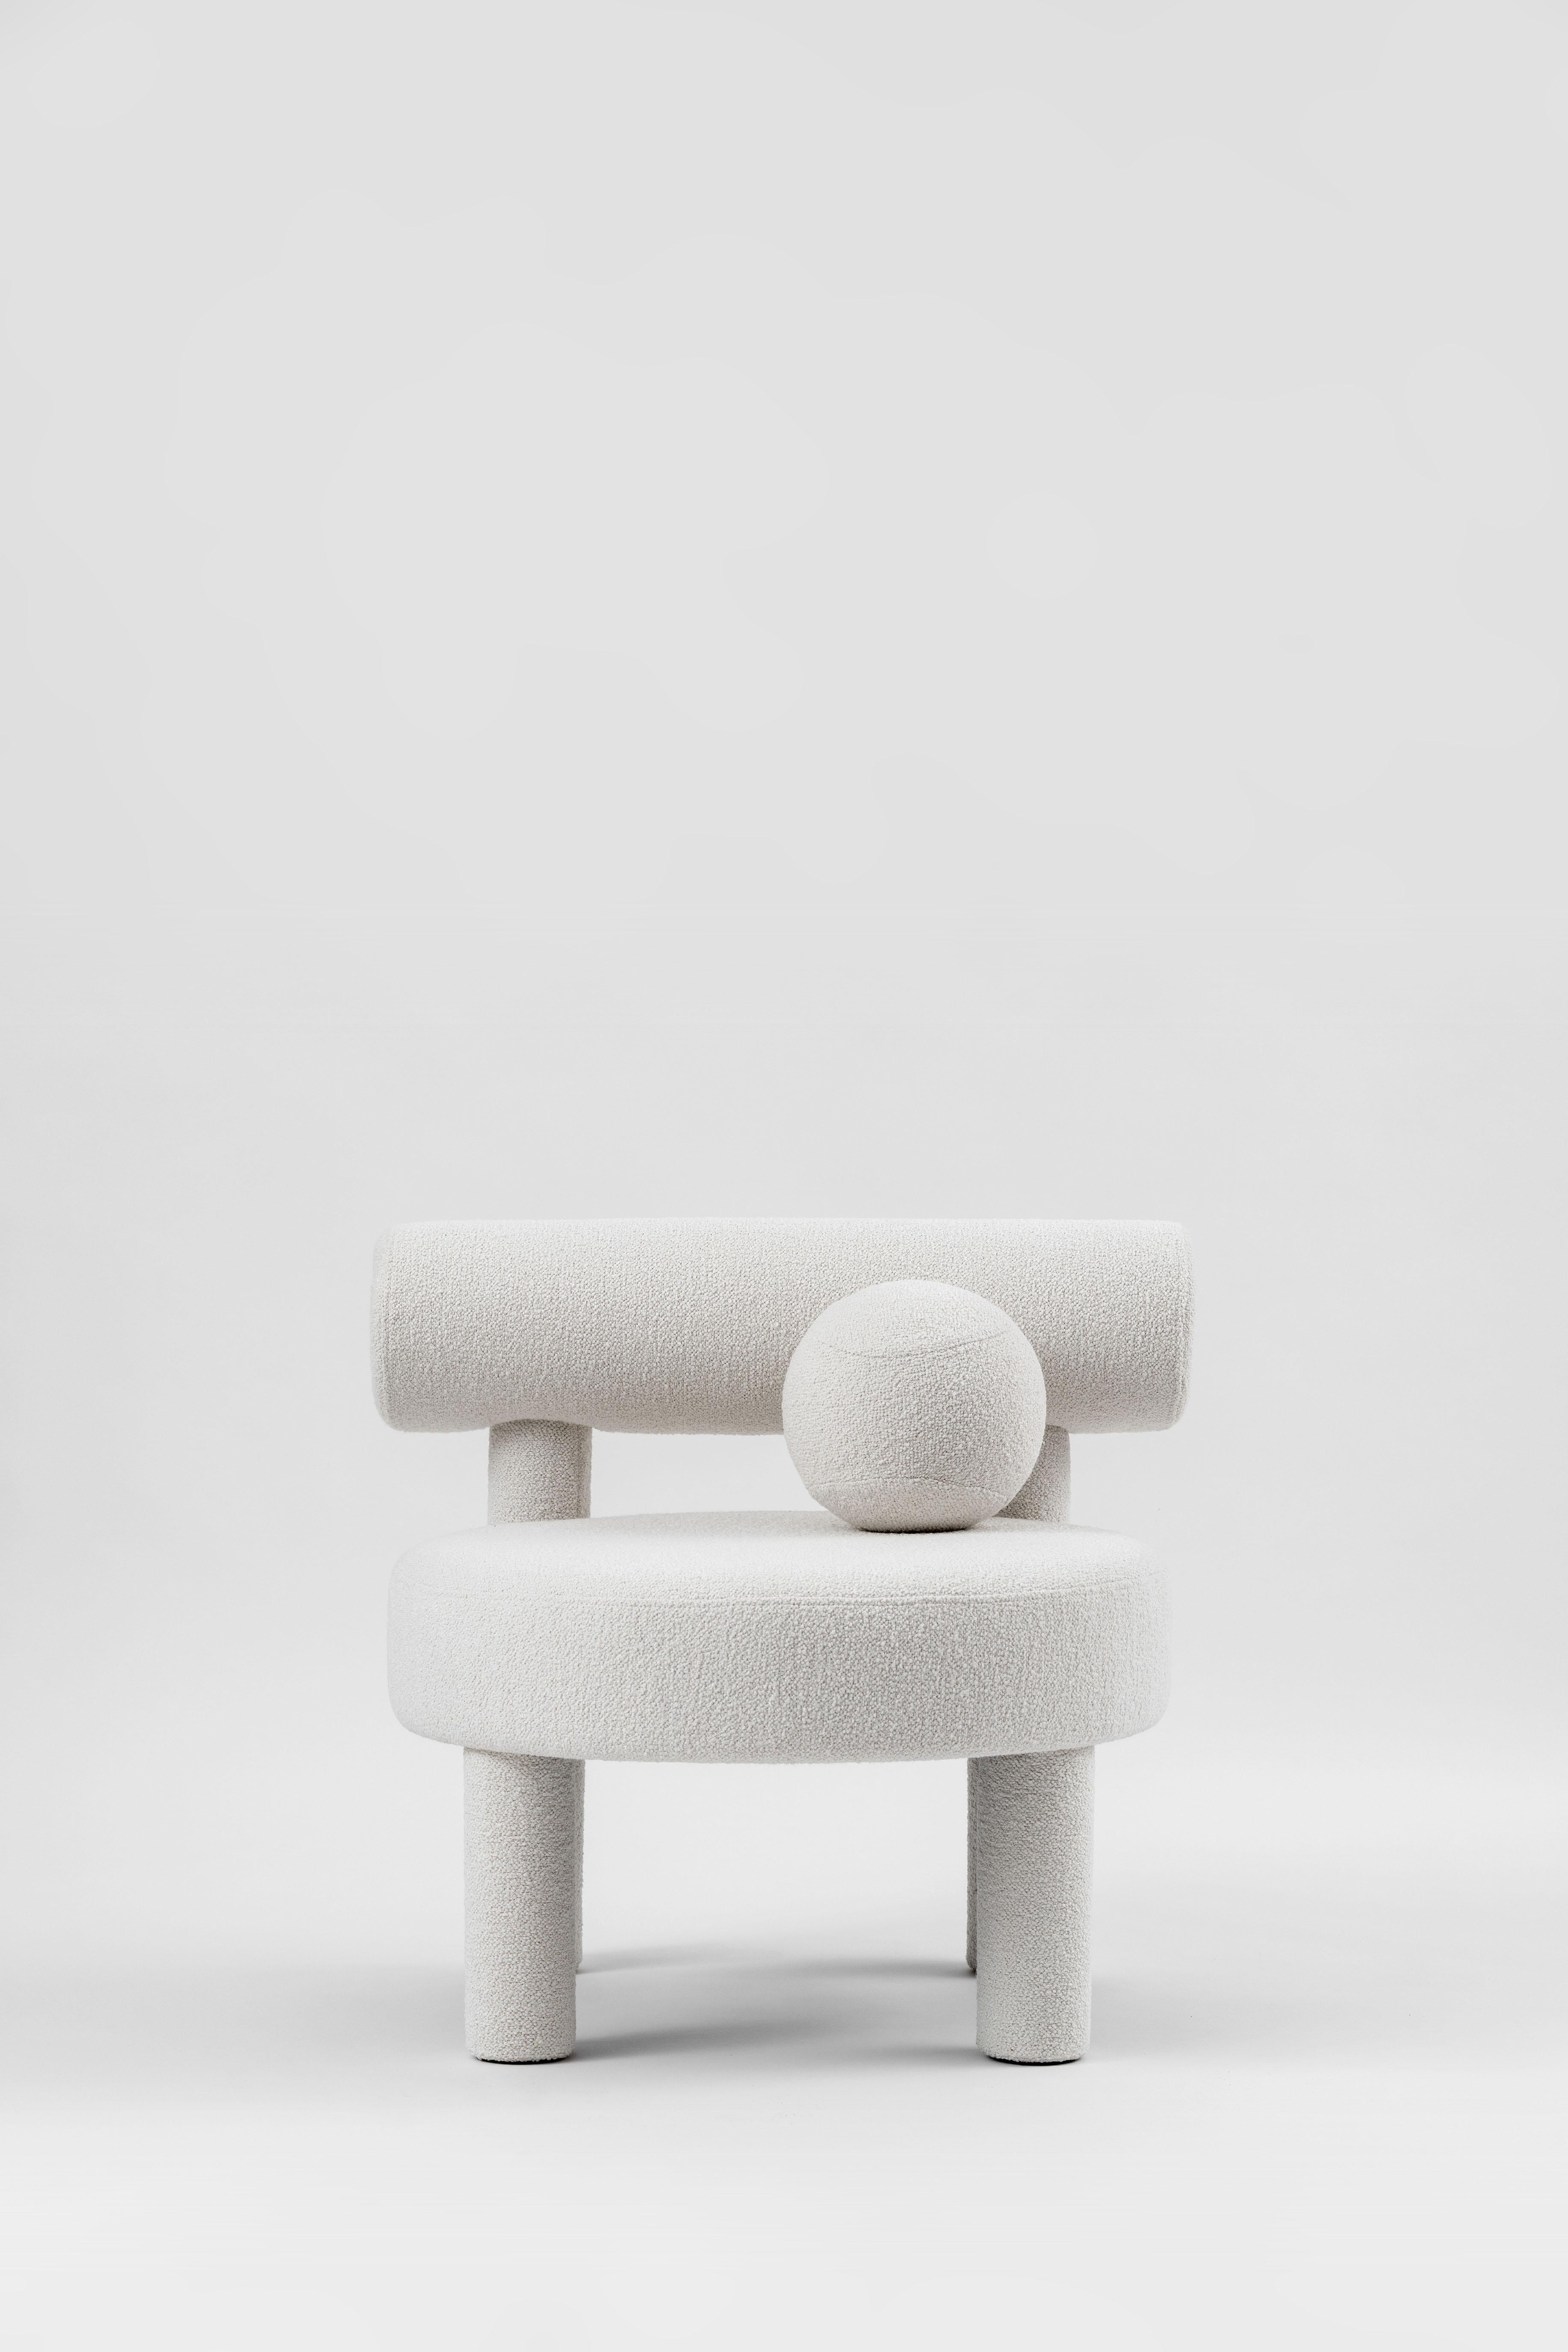 Low Chair 'GROPIUS CS1' by NOOM, Fully upholstered in Bouclé, White In New Condition For Sale In Paris, FR